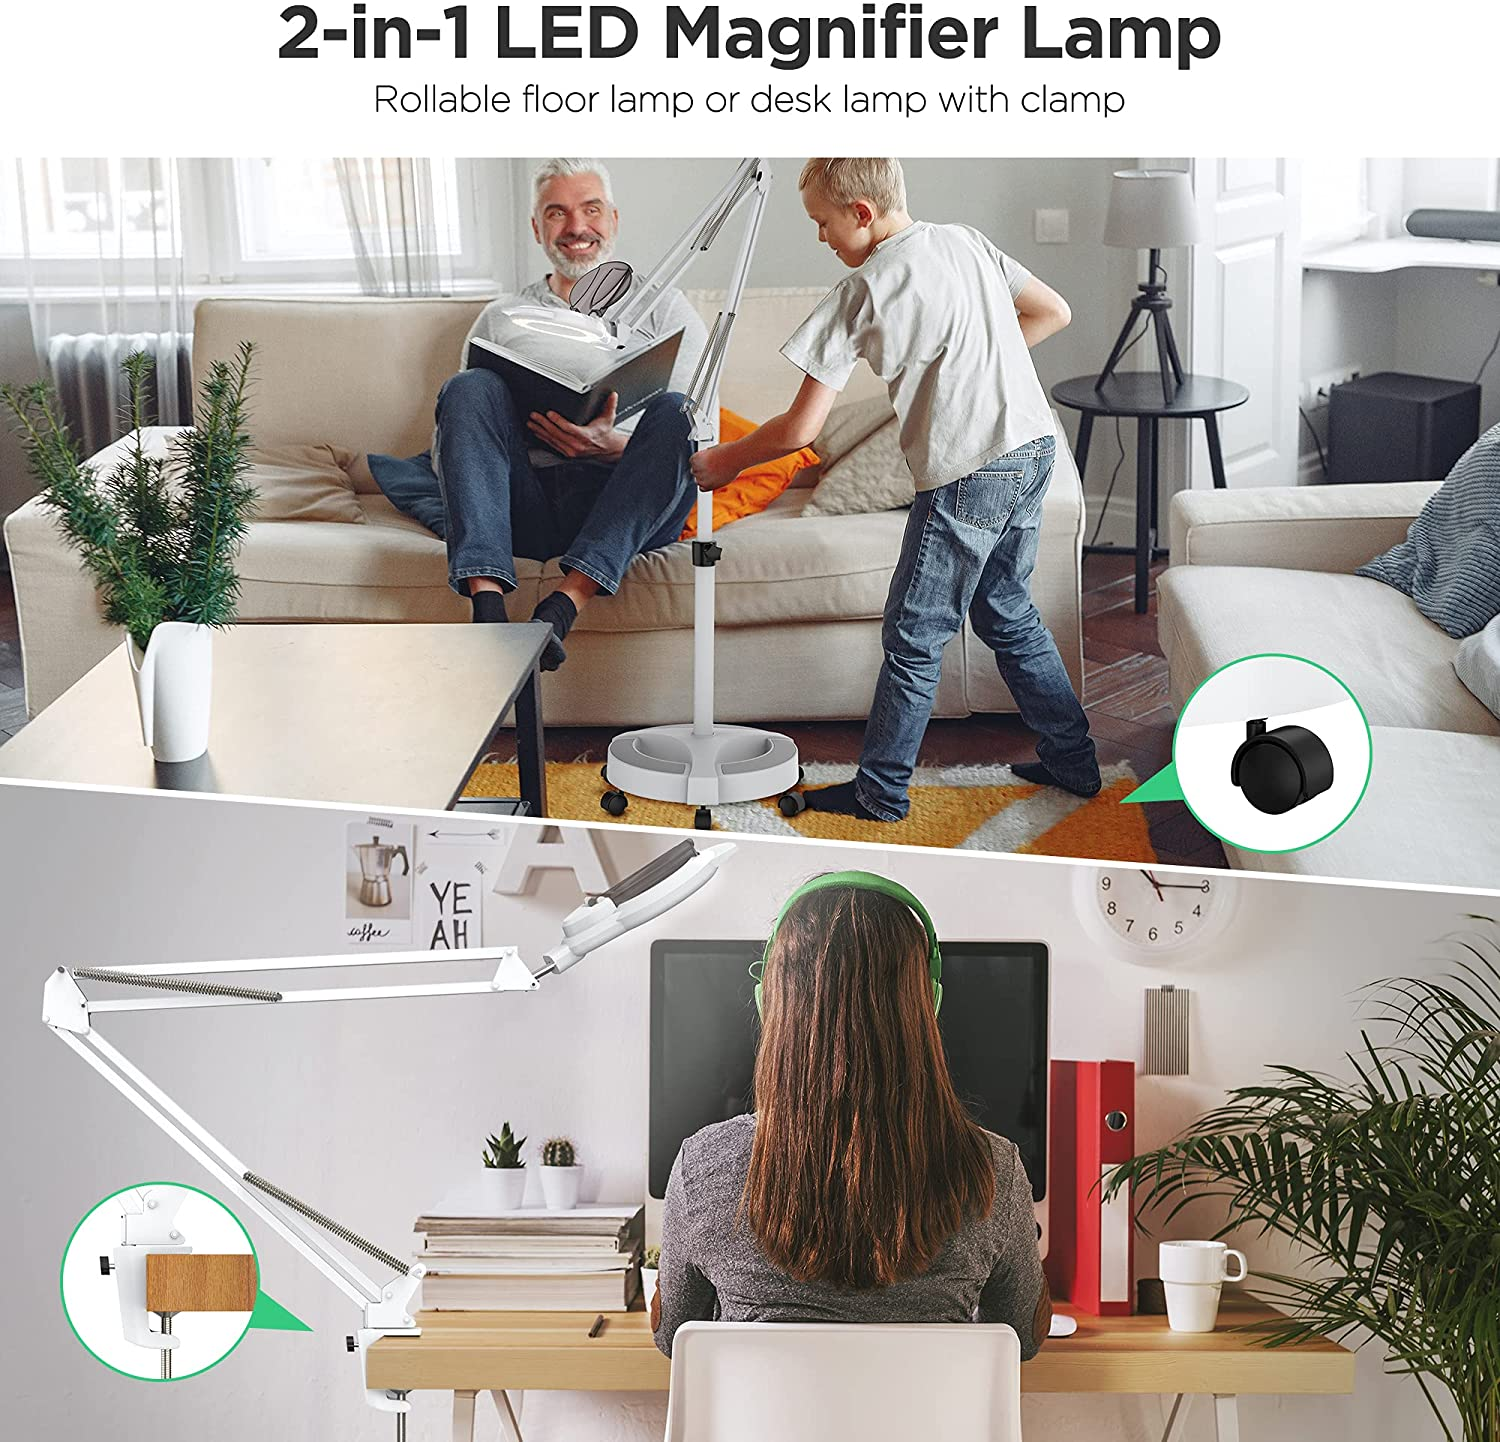 Magnifying Floor lamp with 5 Wheels Rolling Base for Estheticians - 1,500  Lumens LED Dimmable Light with Magnifying Glass, 8-Diopter Lighted  Magnifier